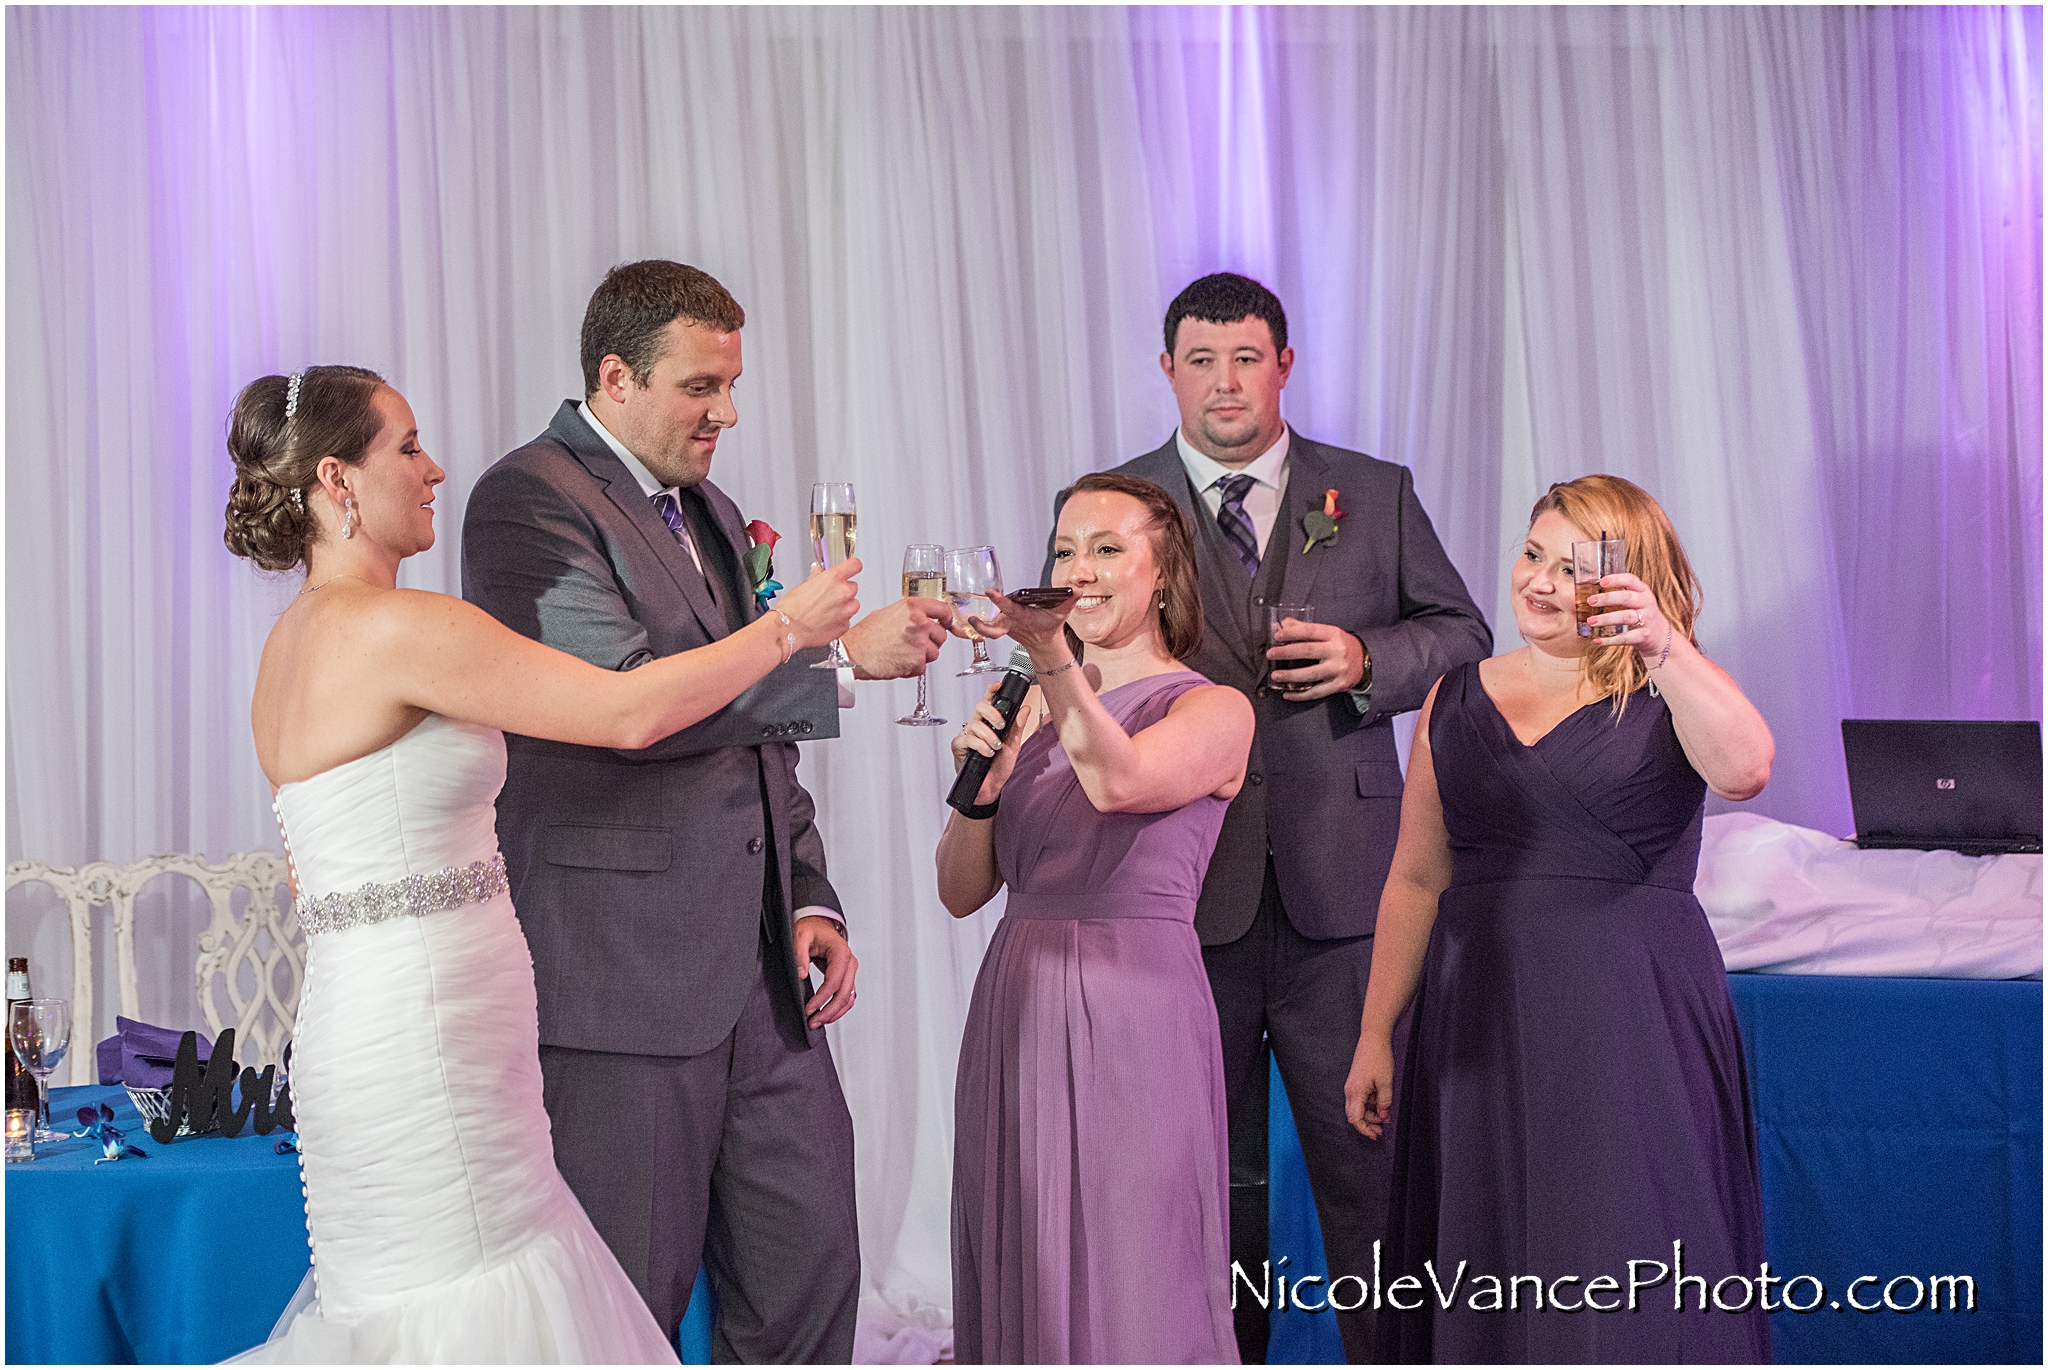 The maid of honor makes a toast to the bride and groom at The Brownstone in Richmond, VA.